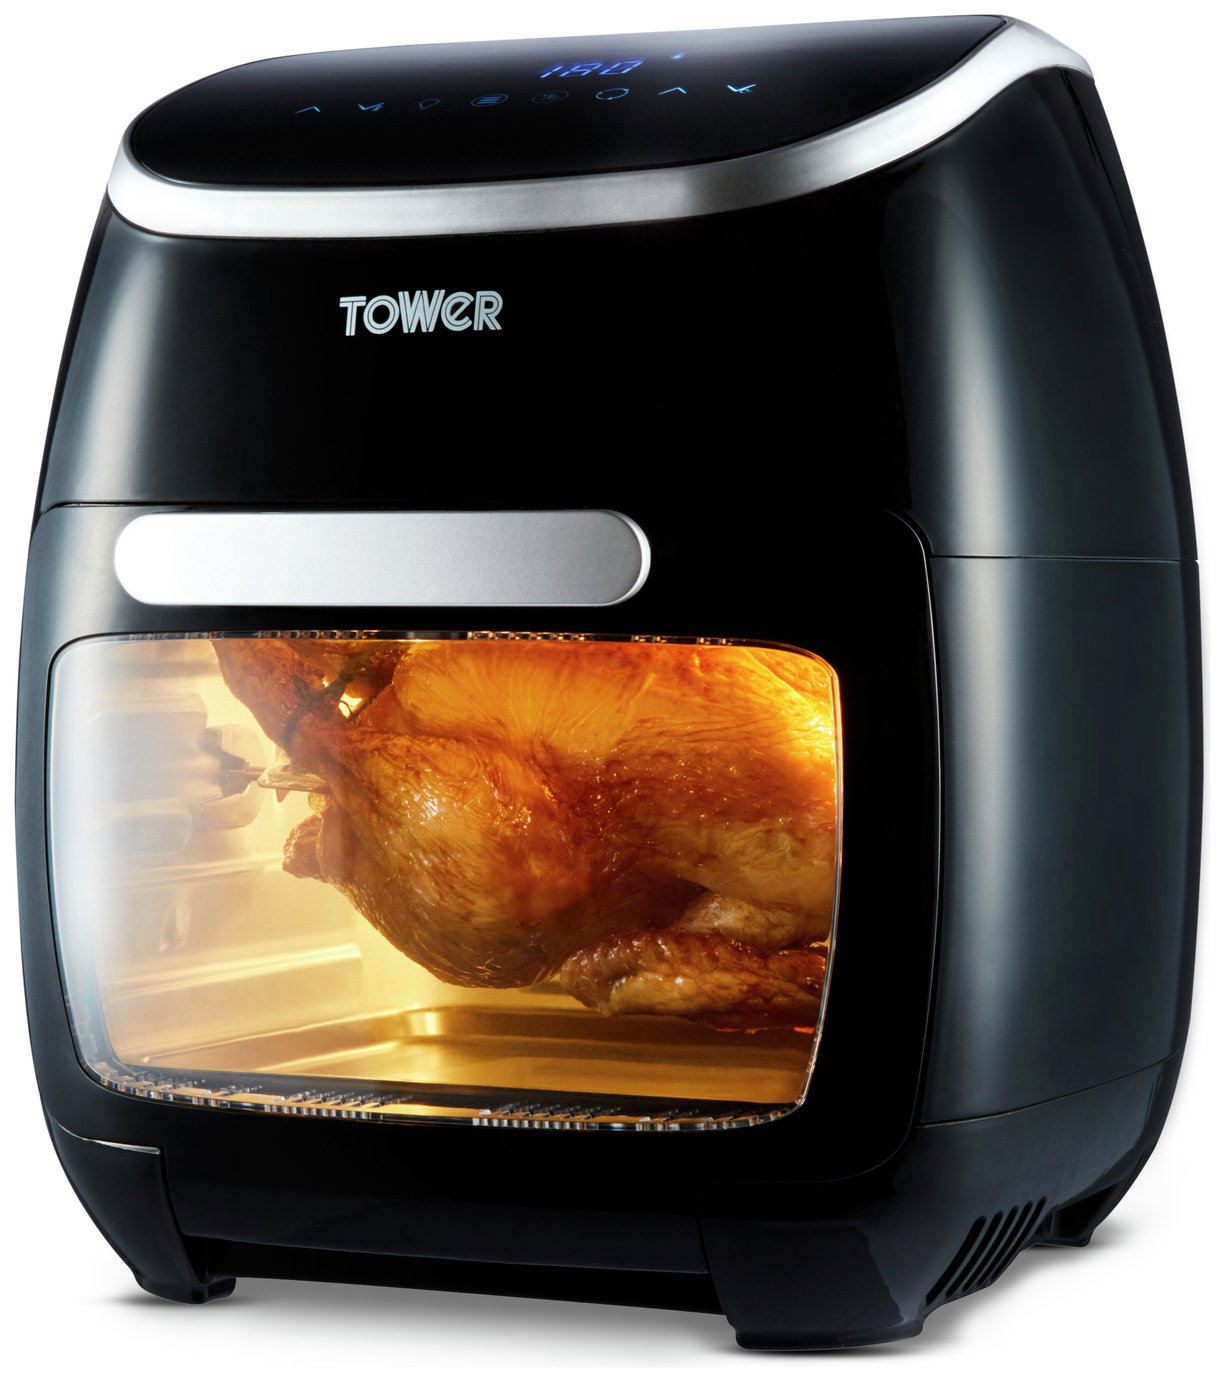 Tower T17039 11L Air Fryer Oven - Black